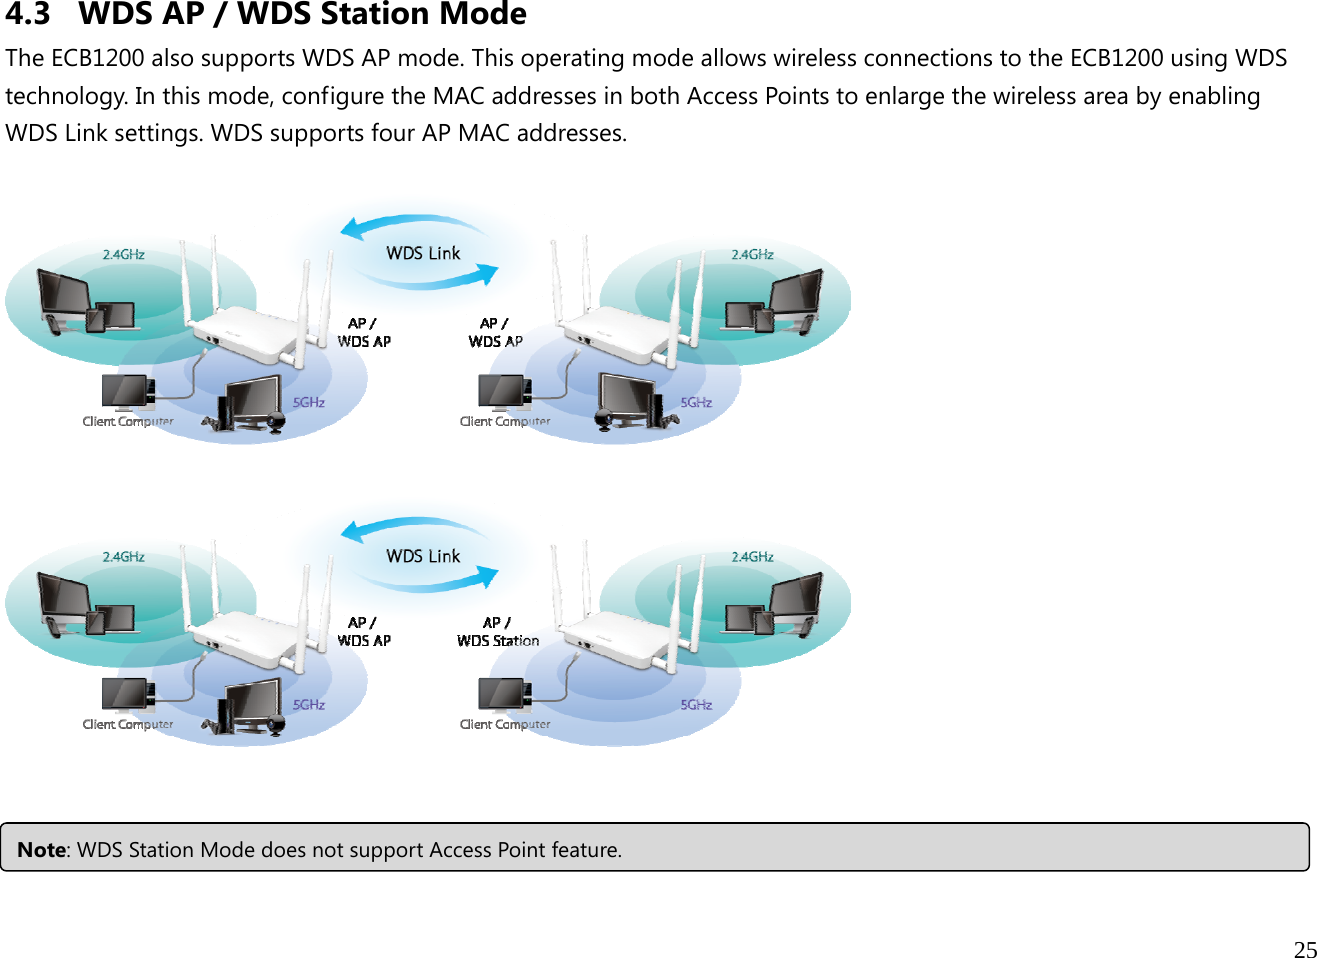  25  4.3 WDS AP / WDS Station Mode The ECB1200 also supports WDS AP mode. This operating mode allows wireless connections to the ECB1200 using WDS technology. In this mode, configure the MAC addresses in both Access Points to enlarge the wireless area by enabling WDS Link settings. WDS supports four AP MAC addresses.   Note: WDS Station Mode does not support Access Point feature.